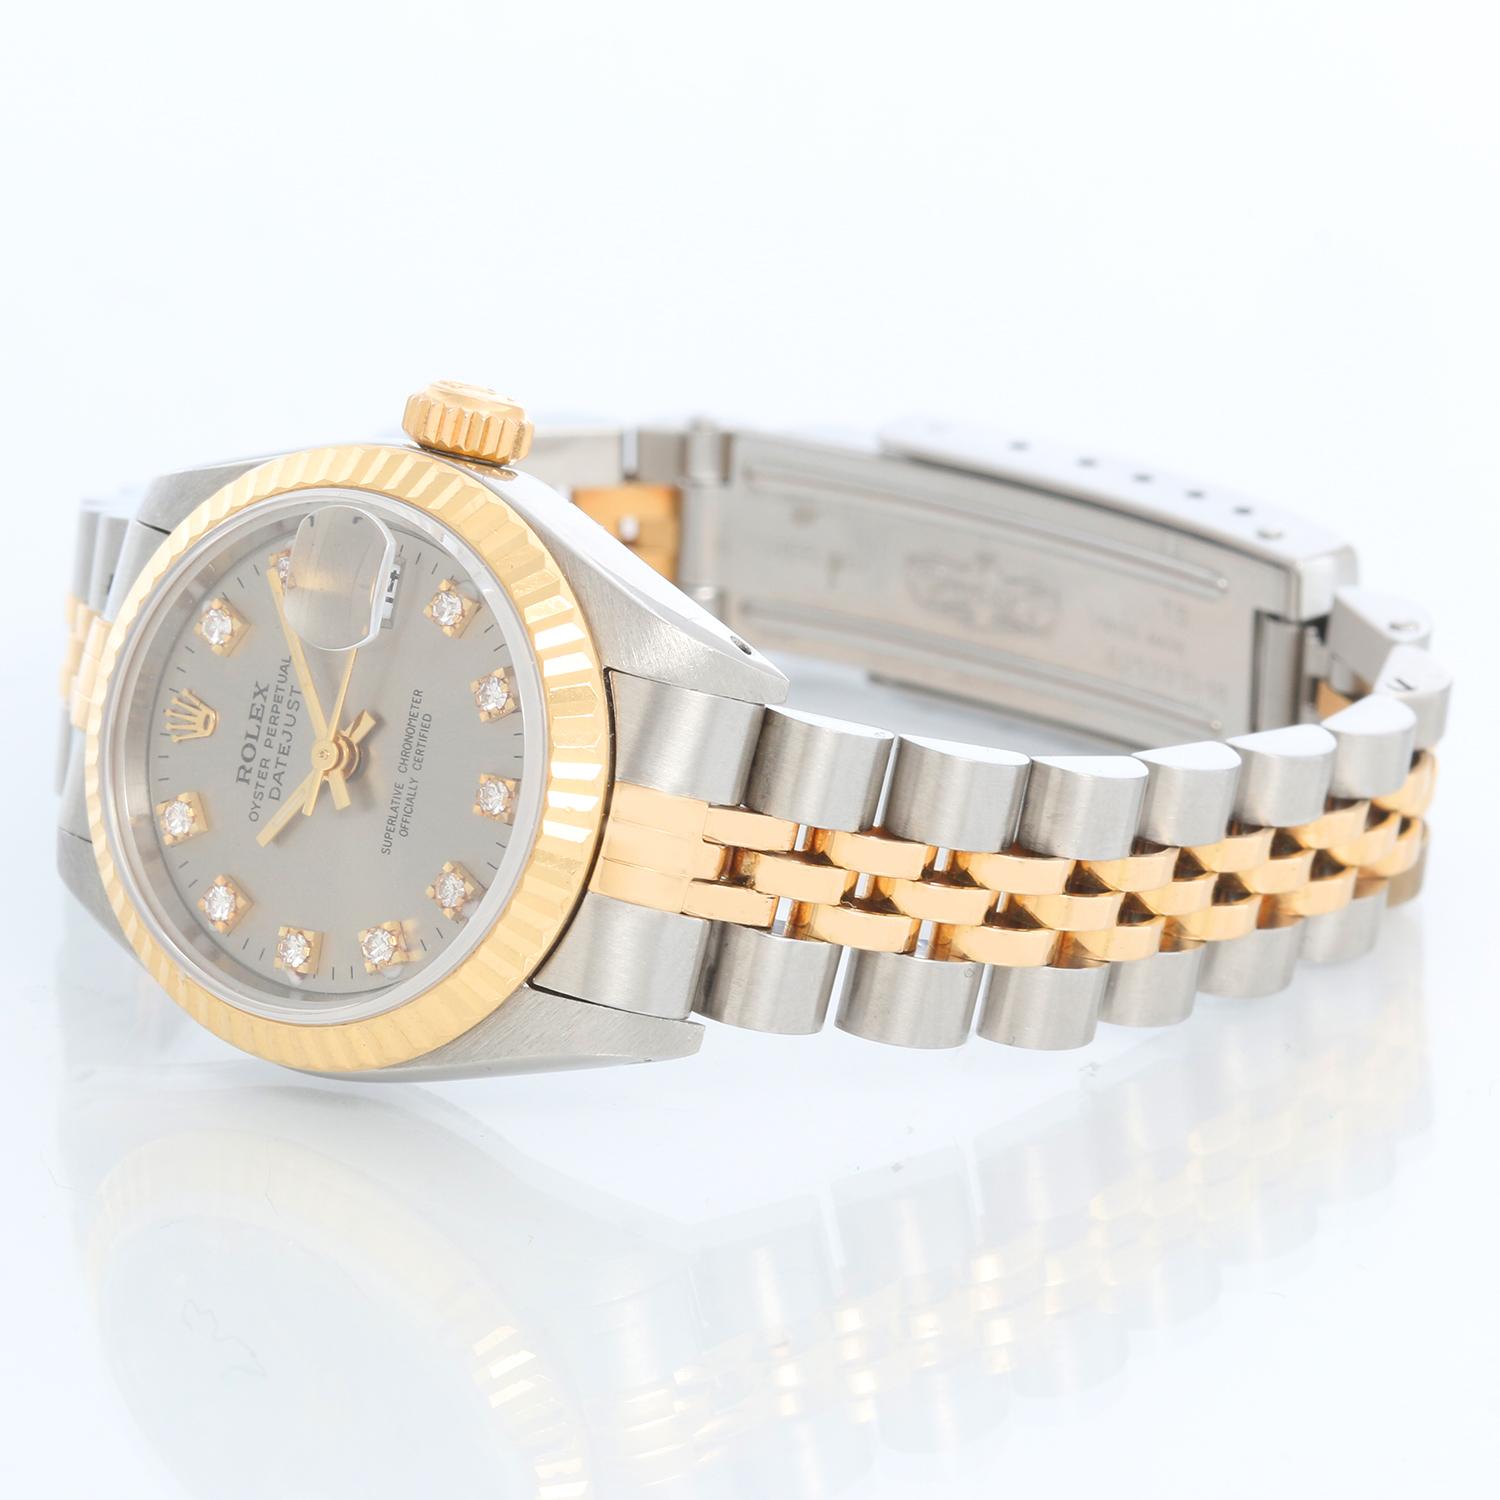 Rolex  2-Tone Datejust Steel & Gold Ladies Watch 69173 - Automatic winding, 29 jewels, Quickset date, sapphire crystal. Stainless steel case with Factory Yellow Gold Diamond Bezel. Custom Grey diamond dial. Stainless steel and 18k yellow gold